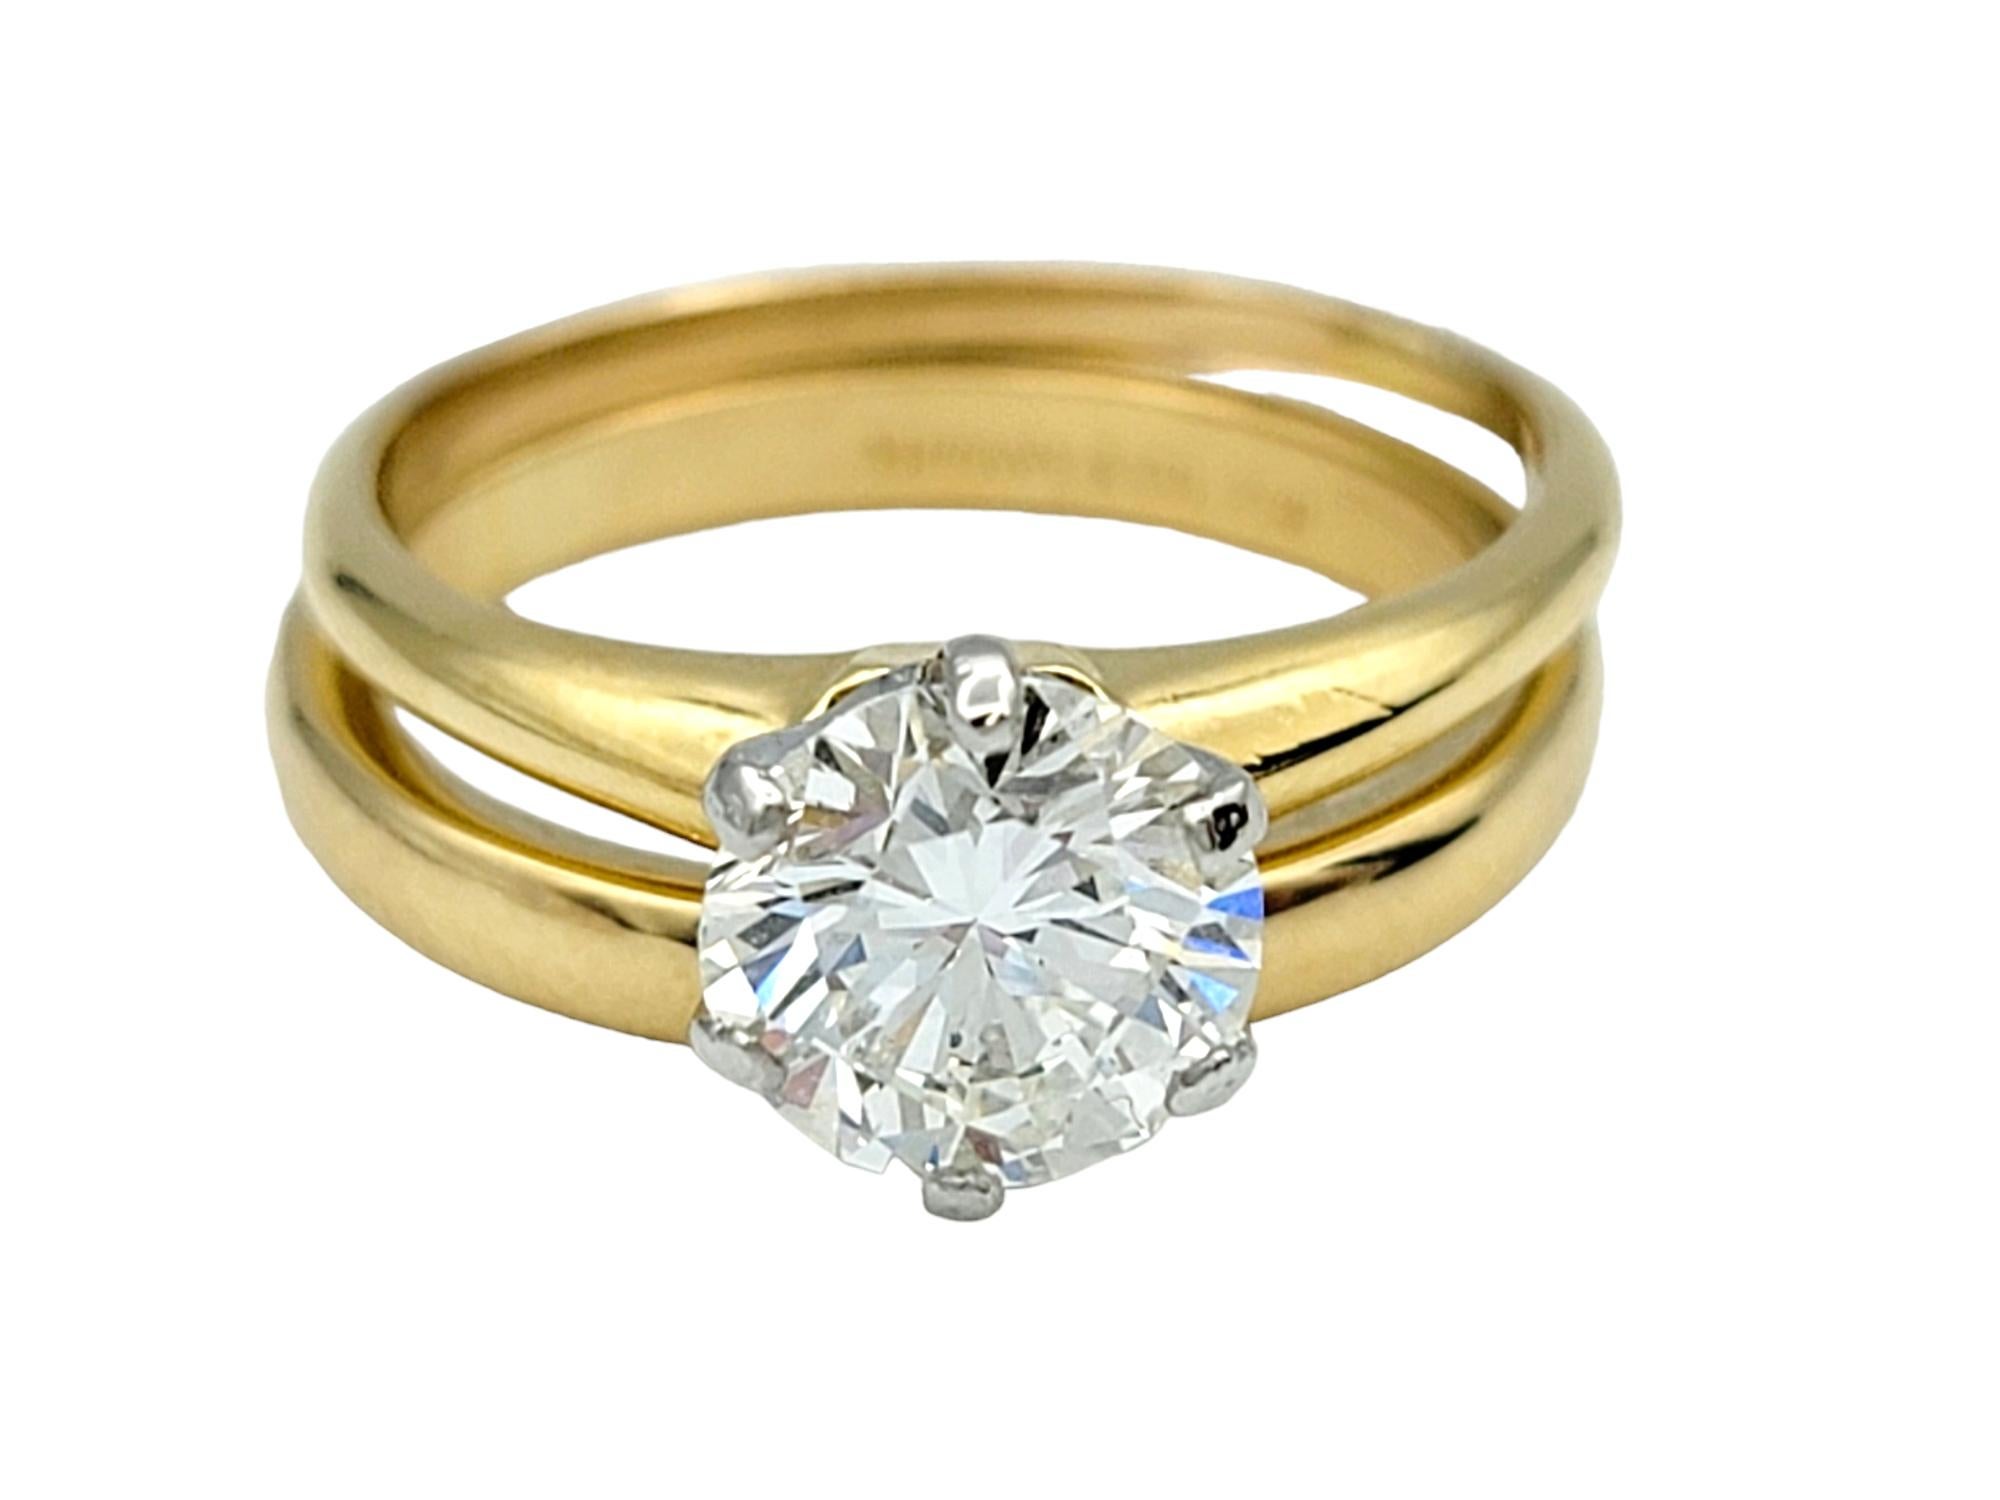 Contemporary Tiffany & Co. 1.28 Carat Diamond Solitaire Ring with Wedding Band in 18K Gold For Sale